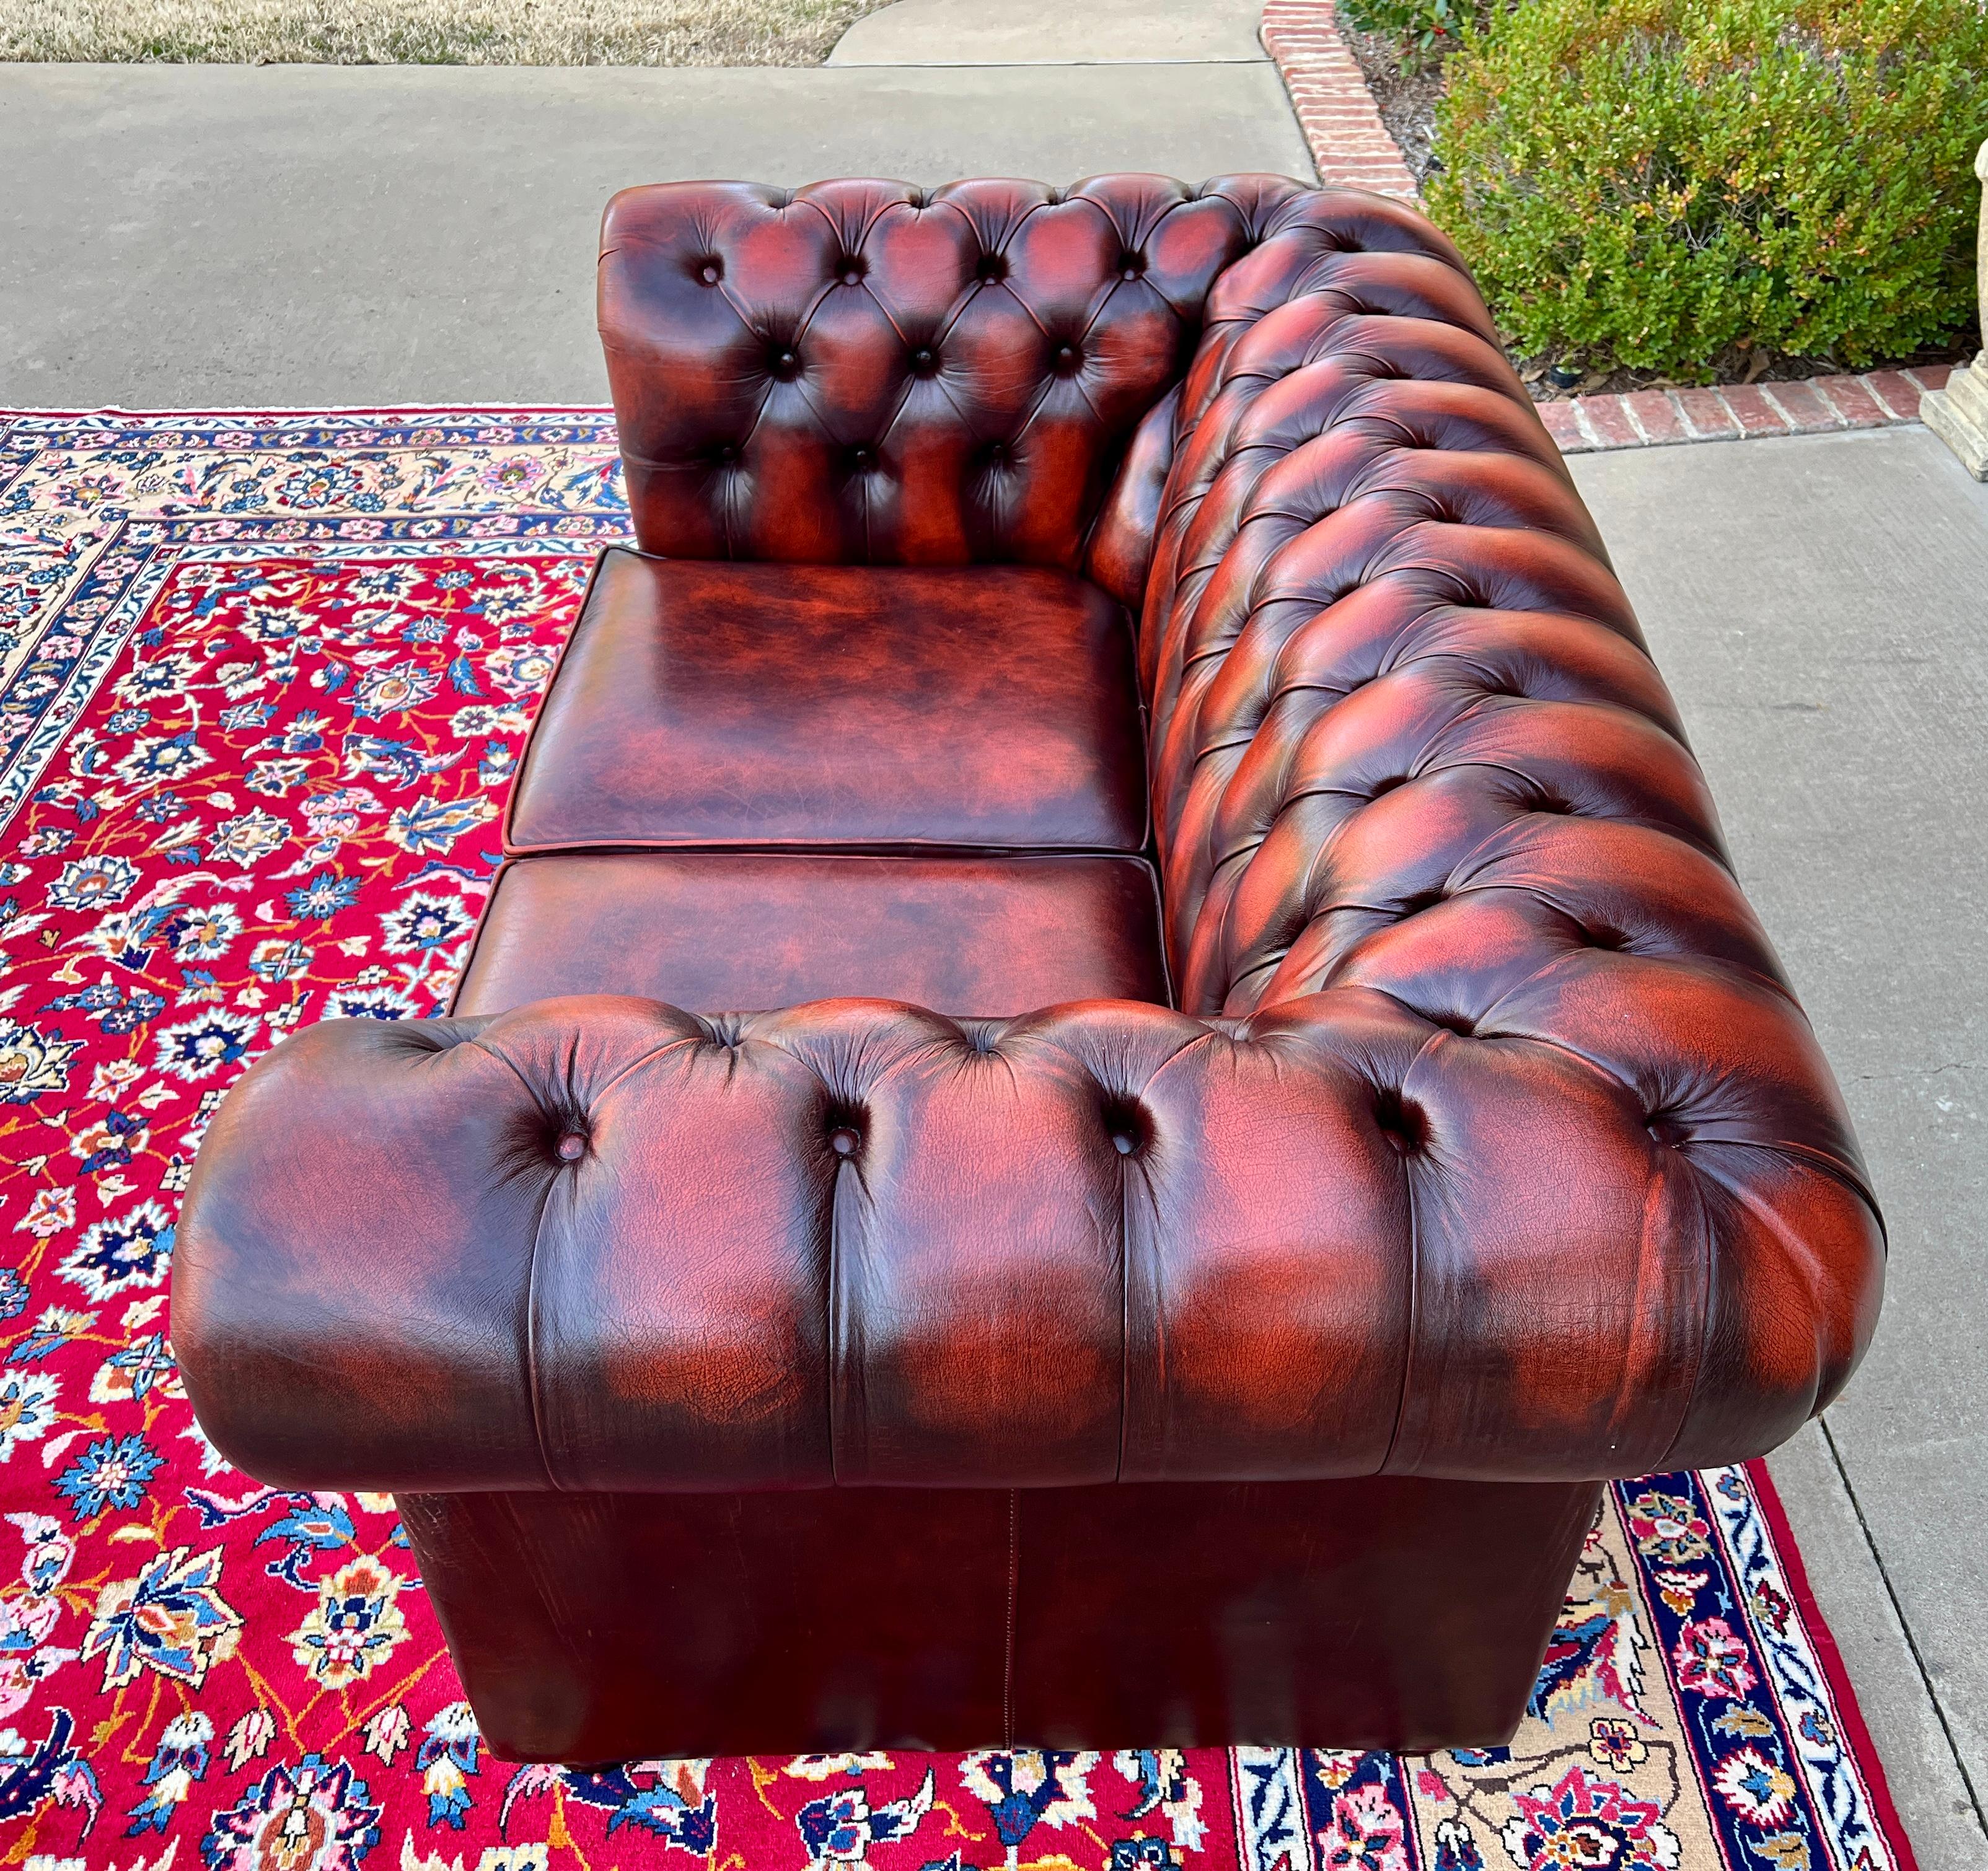 Vintage English Chesterfield Leather Tufted Love Seat Sofa Oxblood Red #2 3